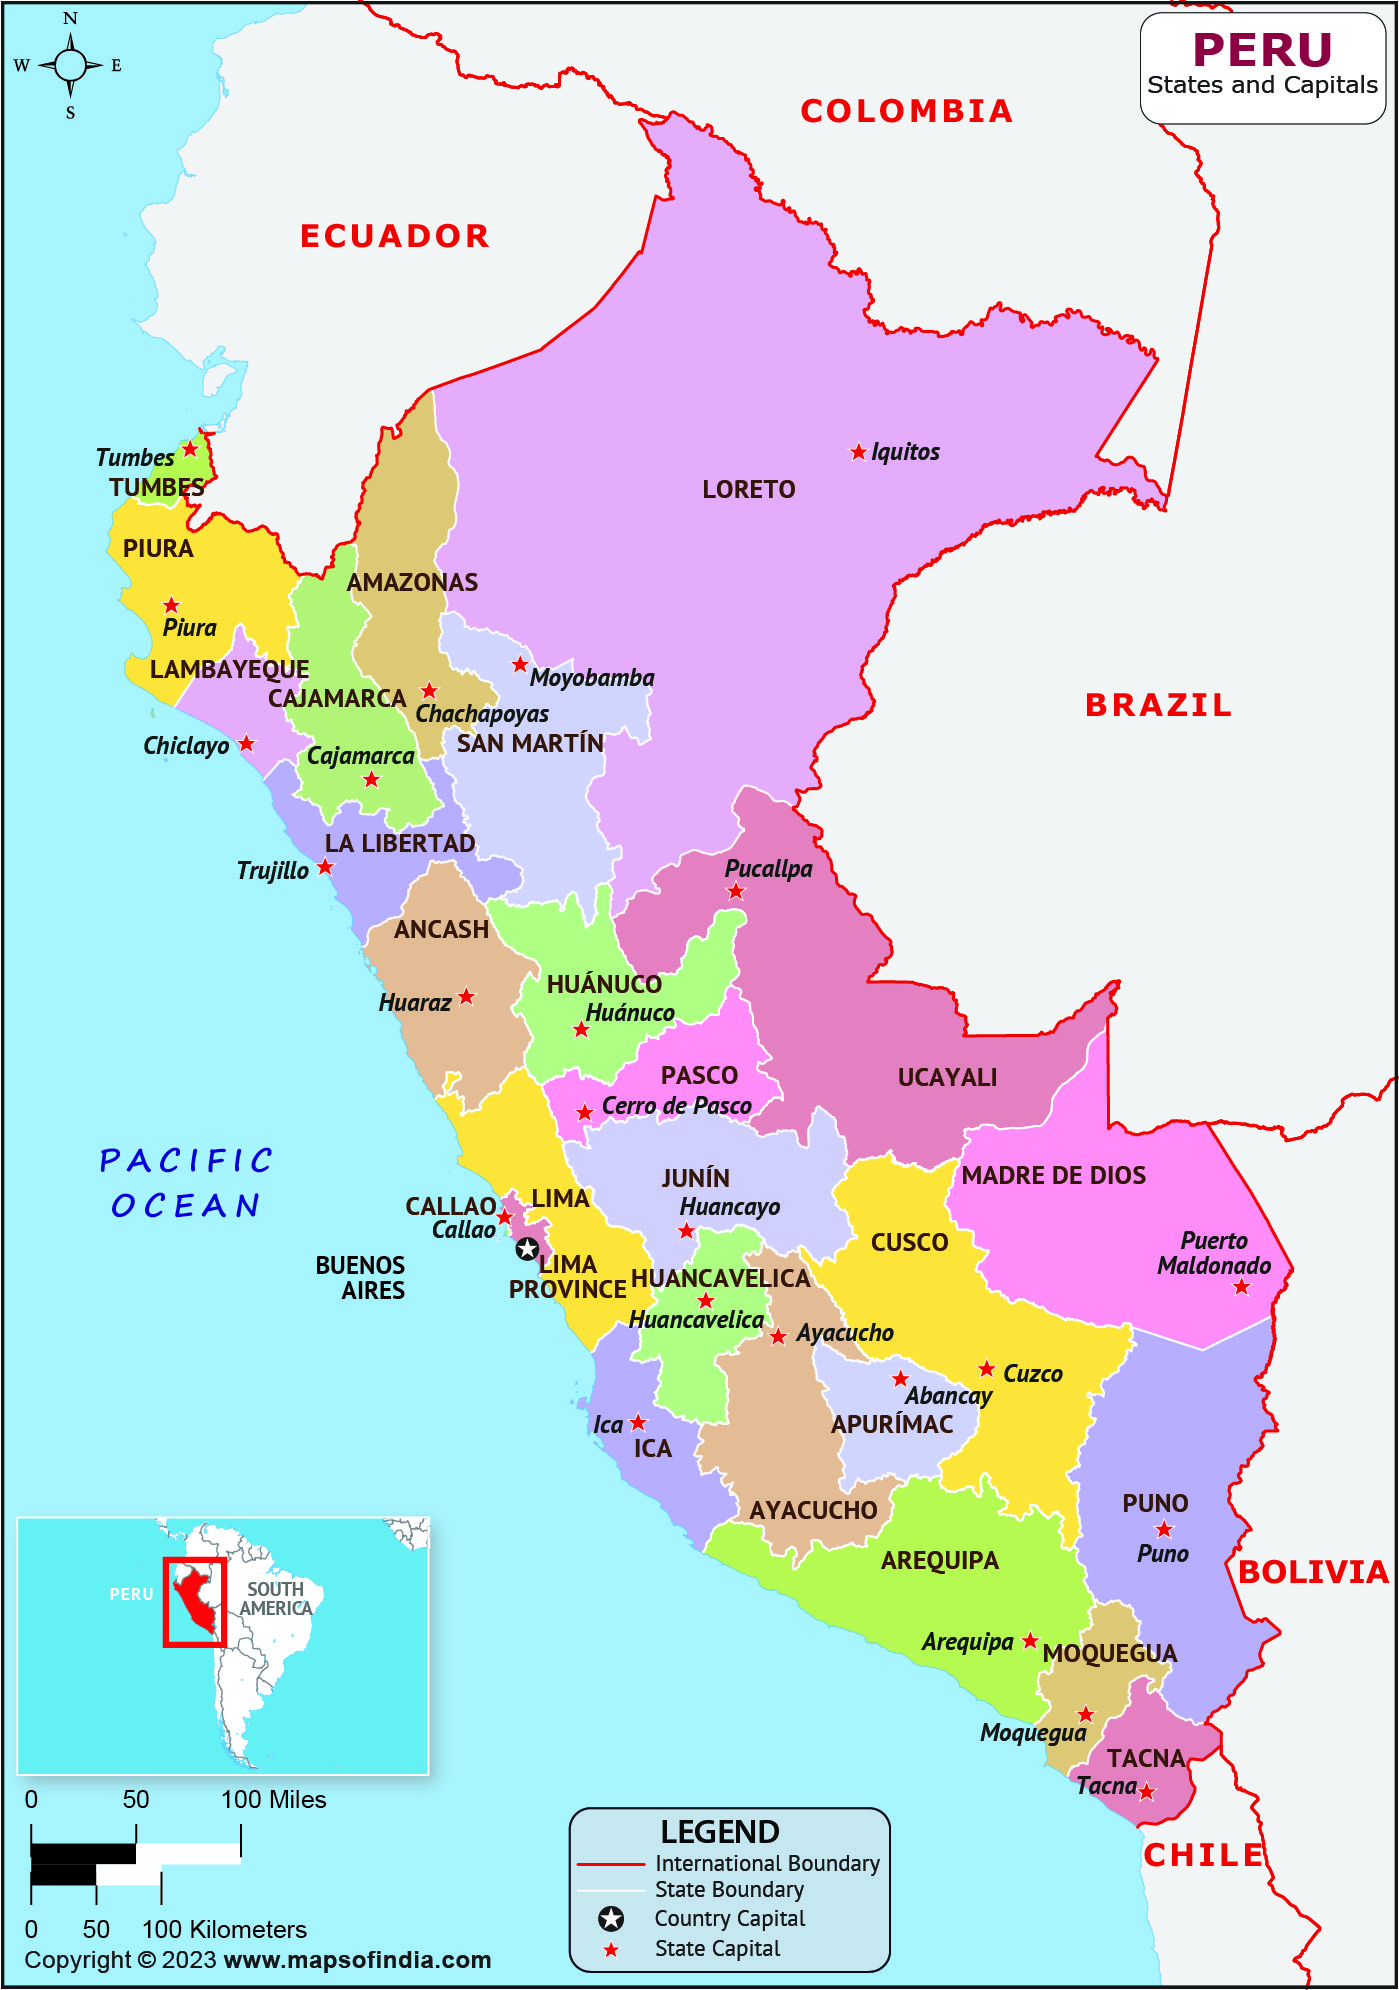 Peru Departments and Capitals List and Map | List of Departments and ...